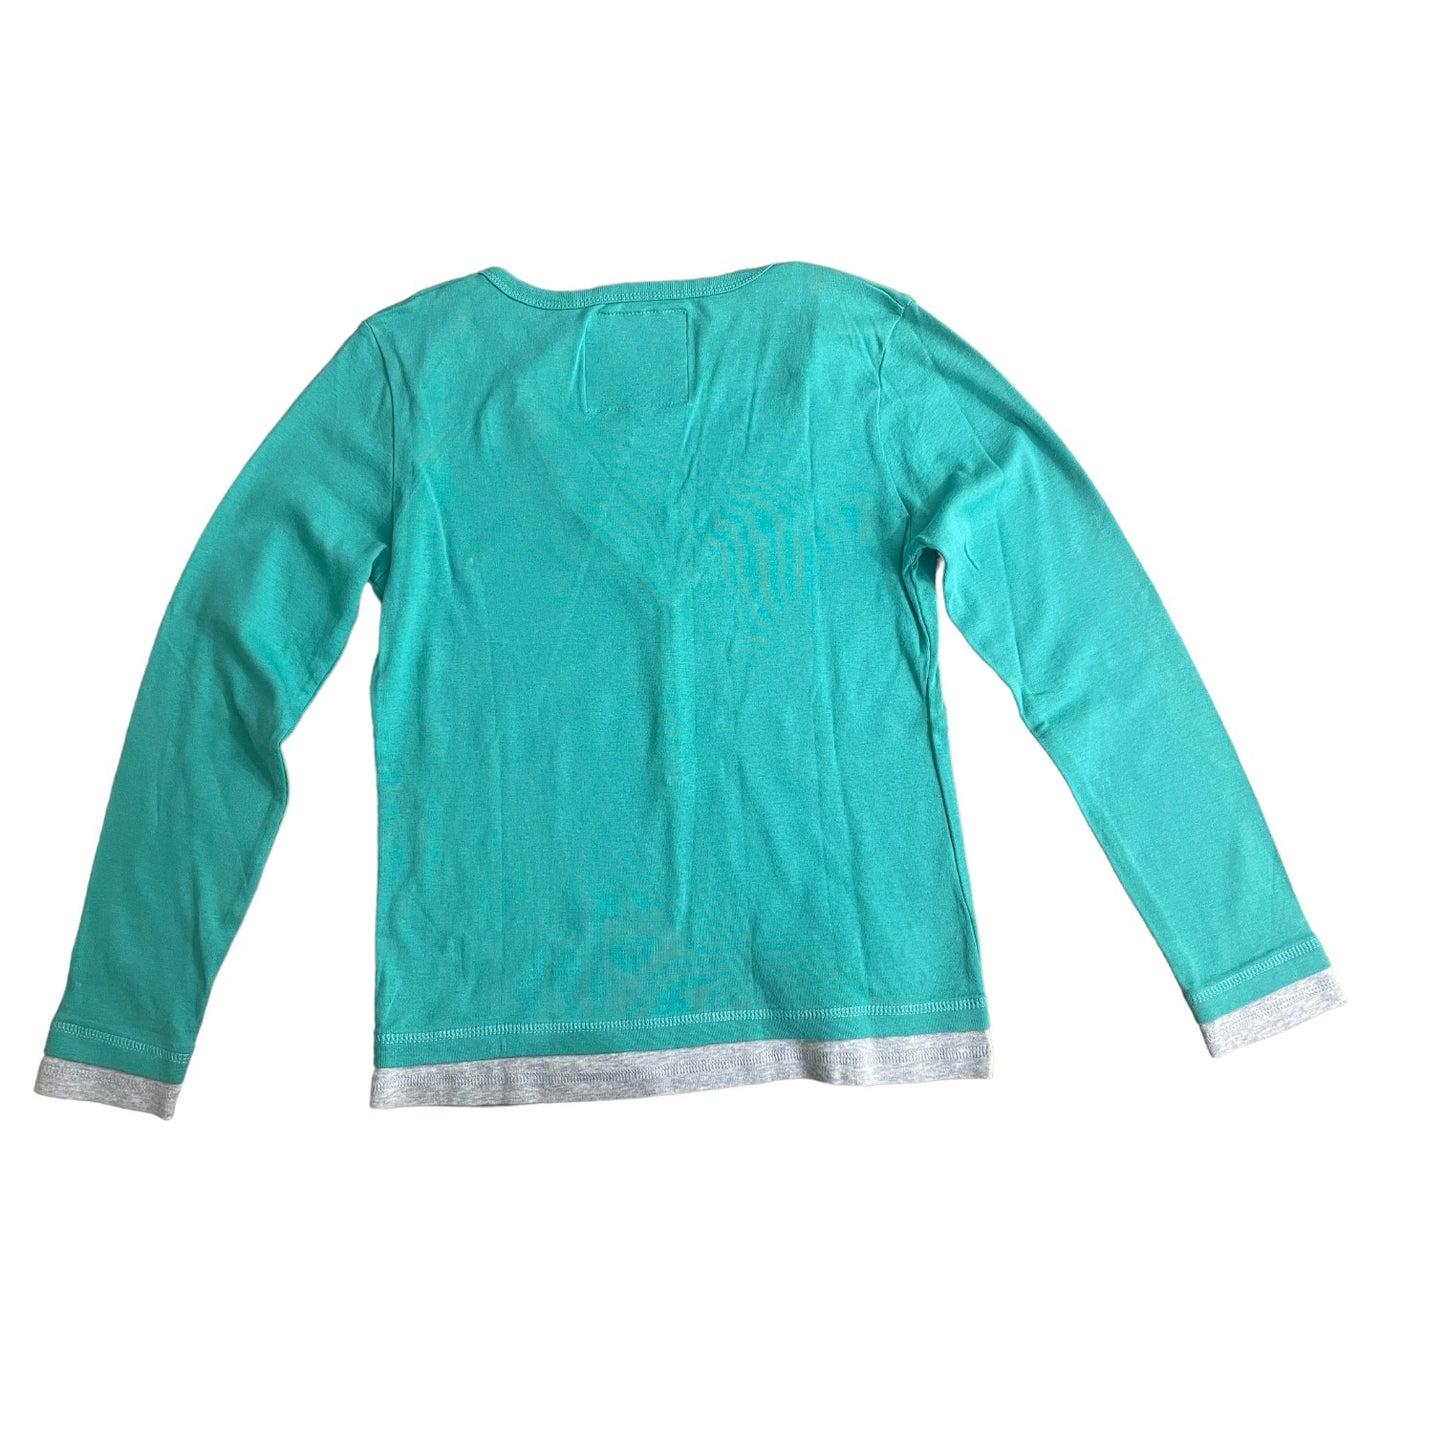 Abercrombie and Fitch Girls Long Sleeve Knit shirt